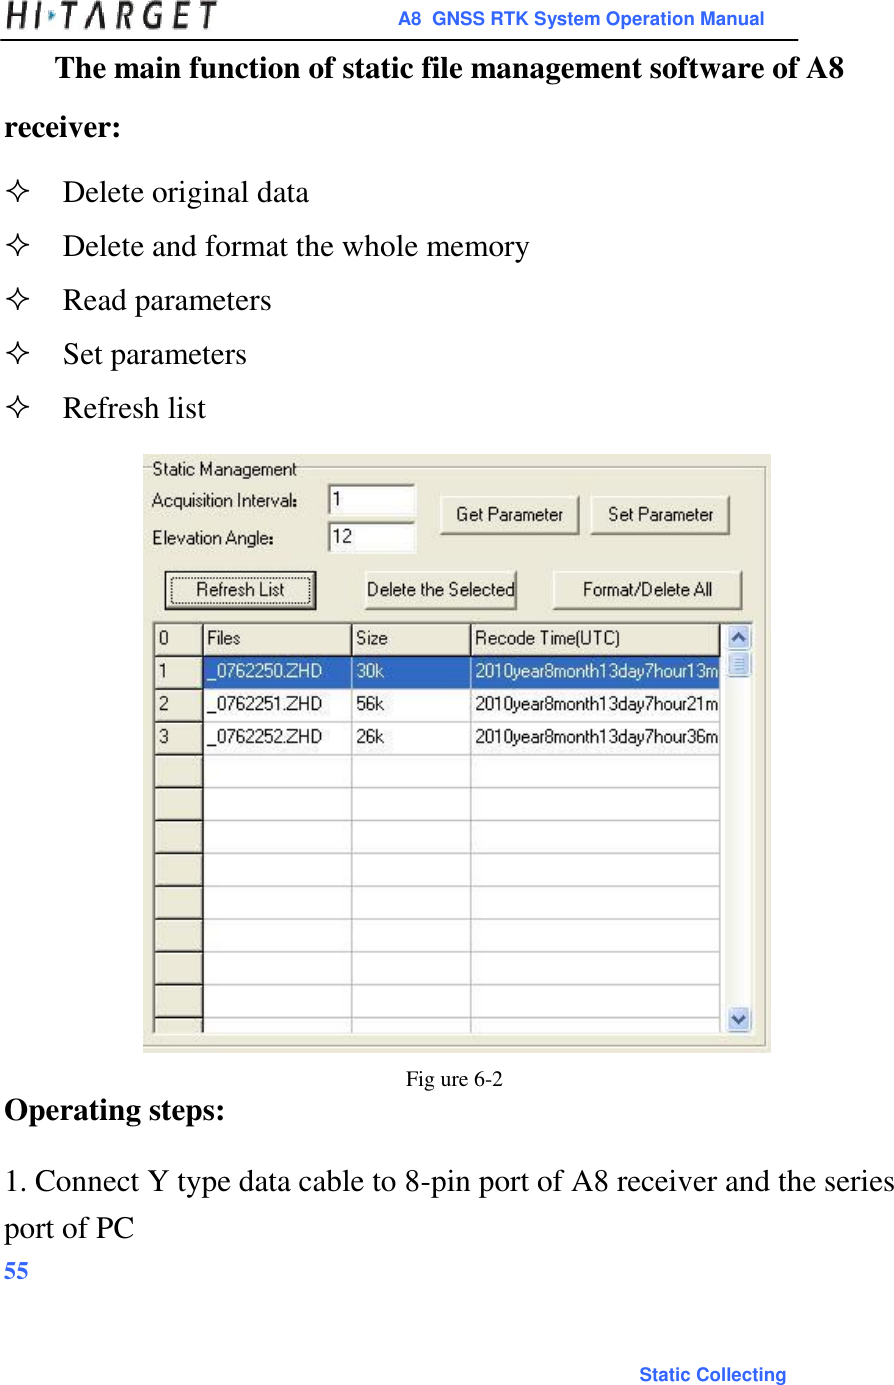 A8  GNSS RTK System Operation Manual  The main function of static file management software of A8 receiver:  Delete original dataDelete and format the whole memoryRead parametersSet parametersRefresh list                              Fig ure 6-2 Operating steps:  1. Connect Y type data cable to 8-pin port of A8 receiver and the series port of PC 55    Static Collecting 